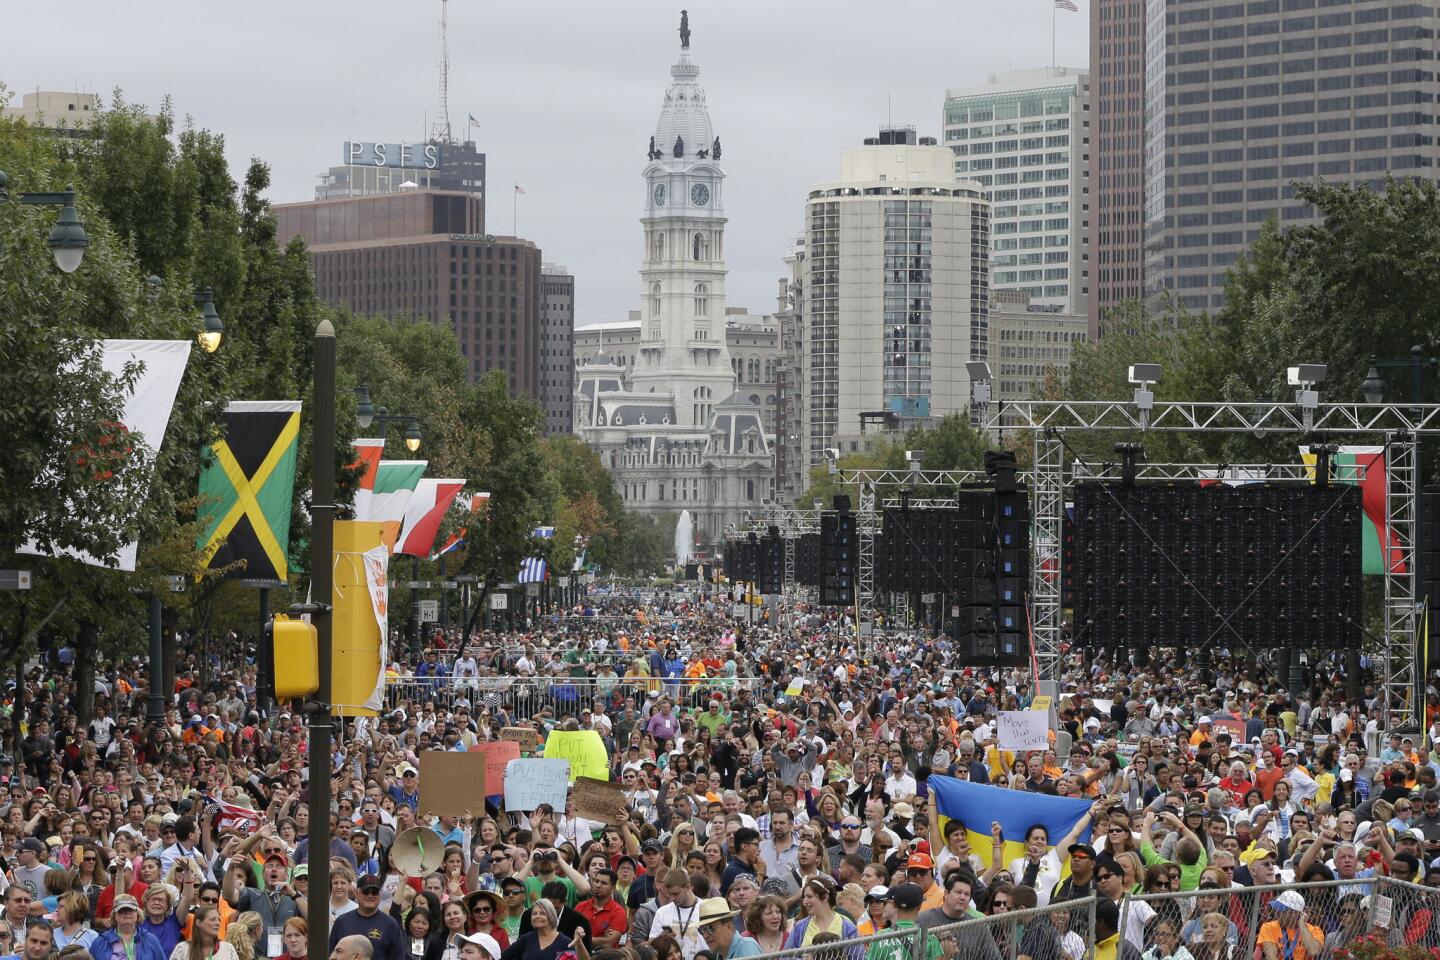 People gathered on the Benjamin Franklin Parkway chant and hold up signs to protest a tent that was erected, blocking their view of Pope Francis before his Mass, Sunday, Sept. 27, 2015, in Philadelphia.